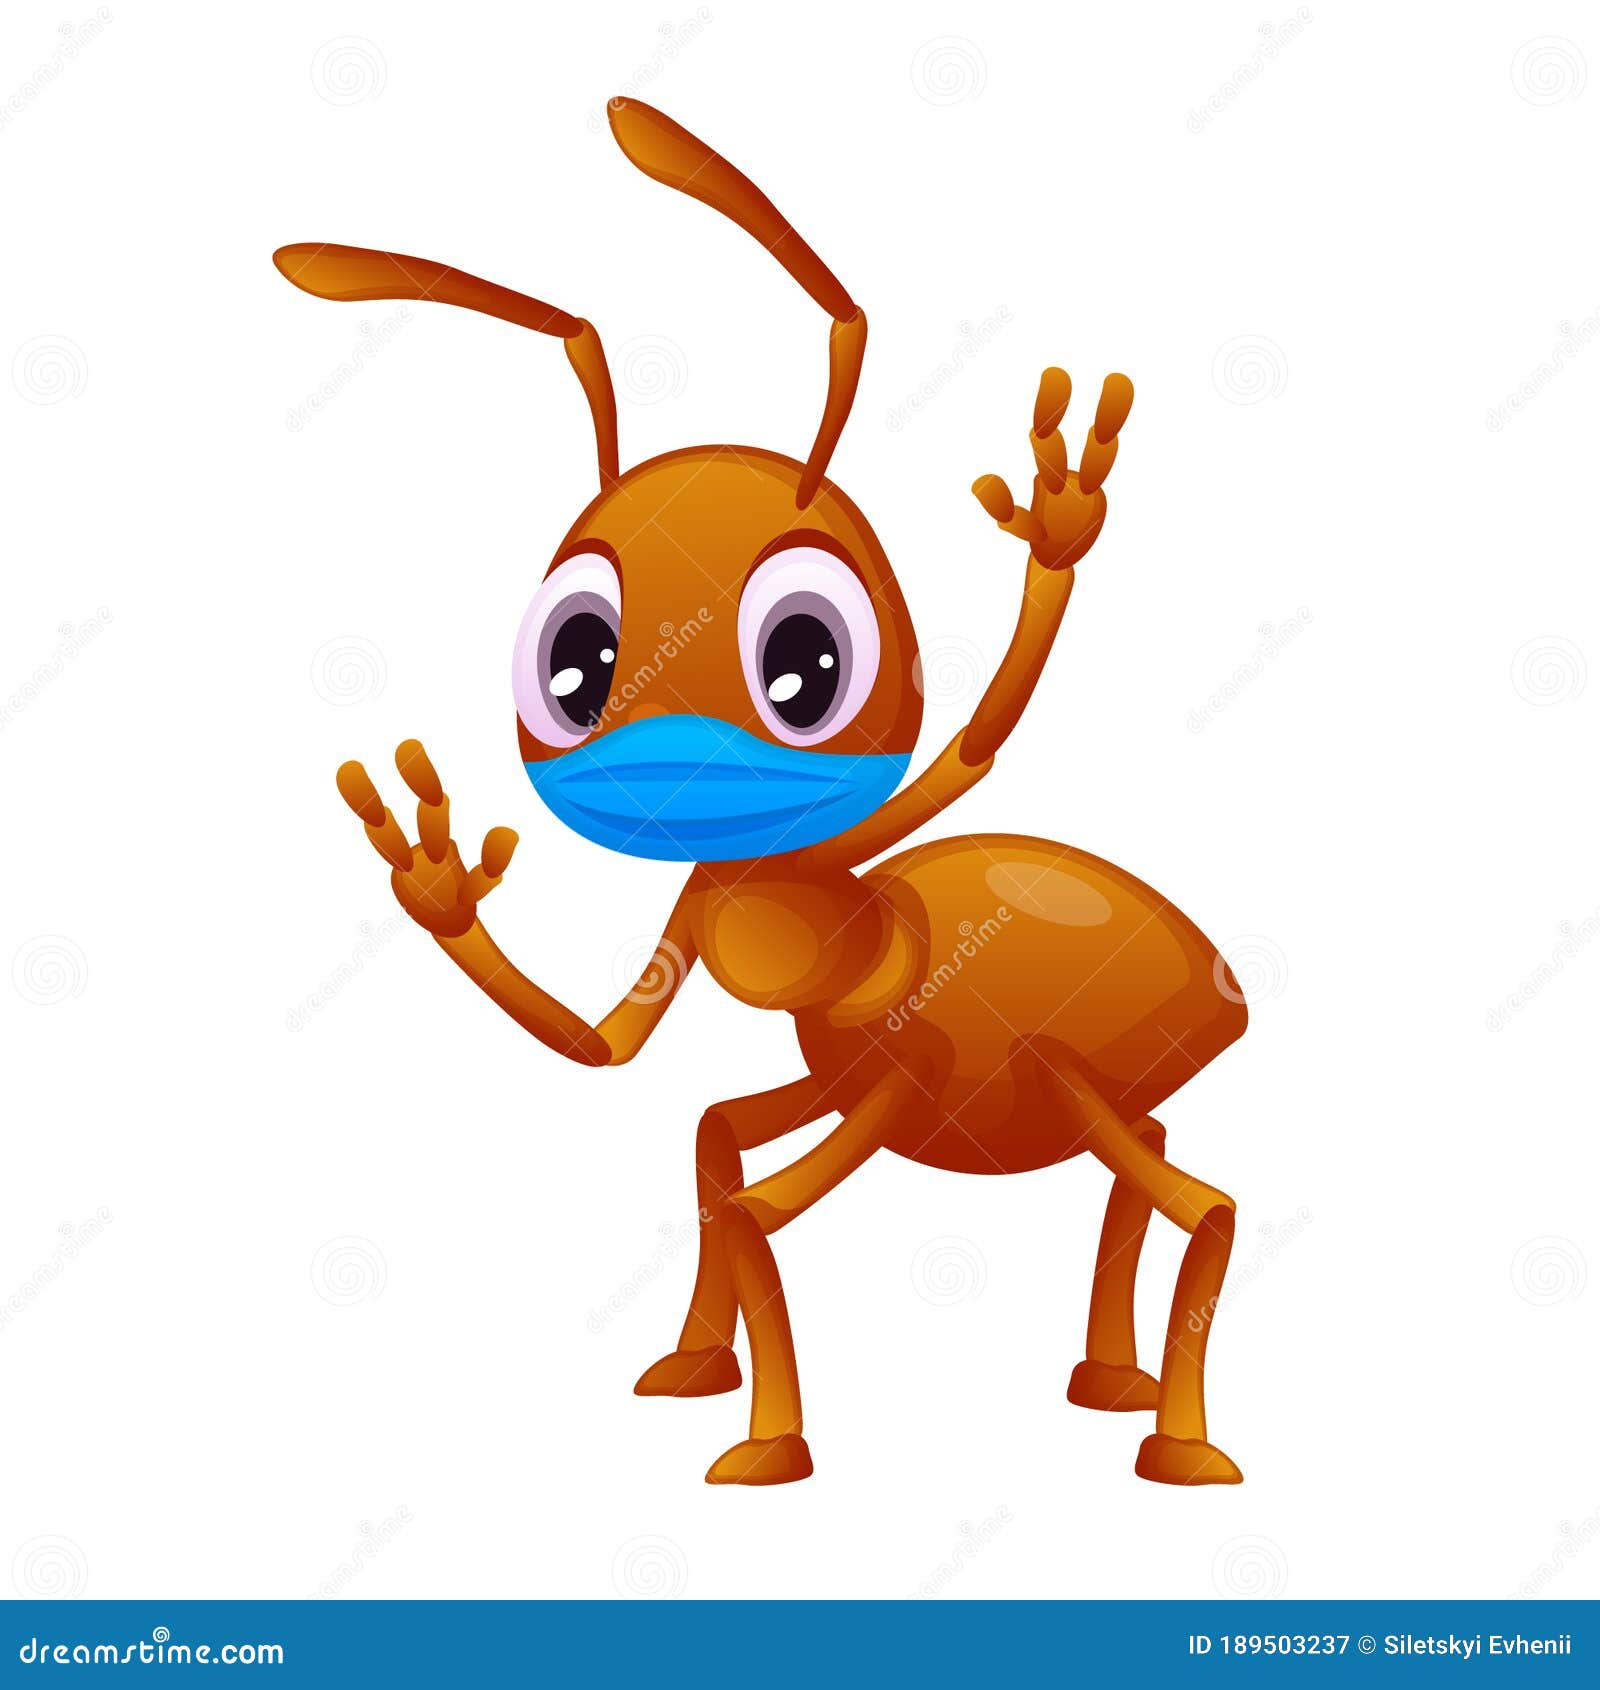 Adorable Little Ant in a Face Mask is Waving Its Hand, Cartoon Style  Coronavirus Stock Vector - Illustration of pandemic, nature: 189503237